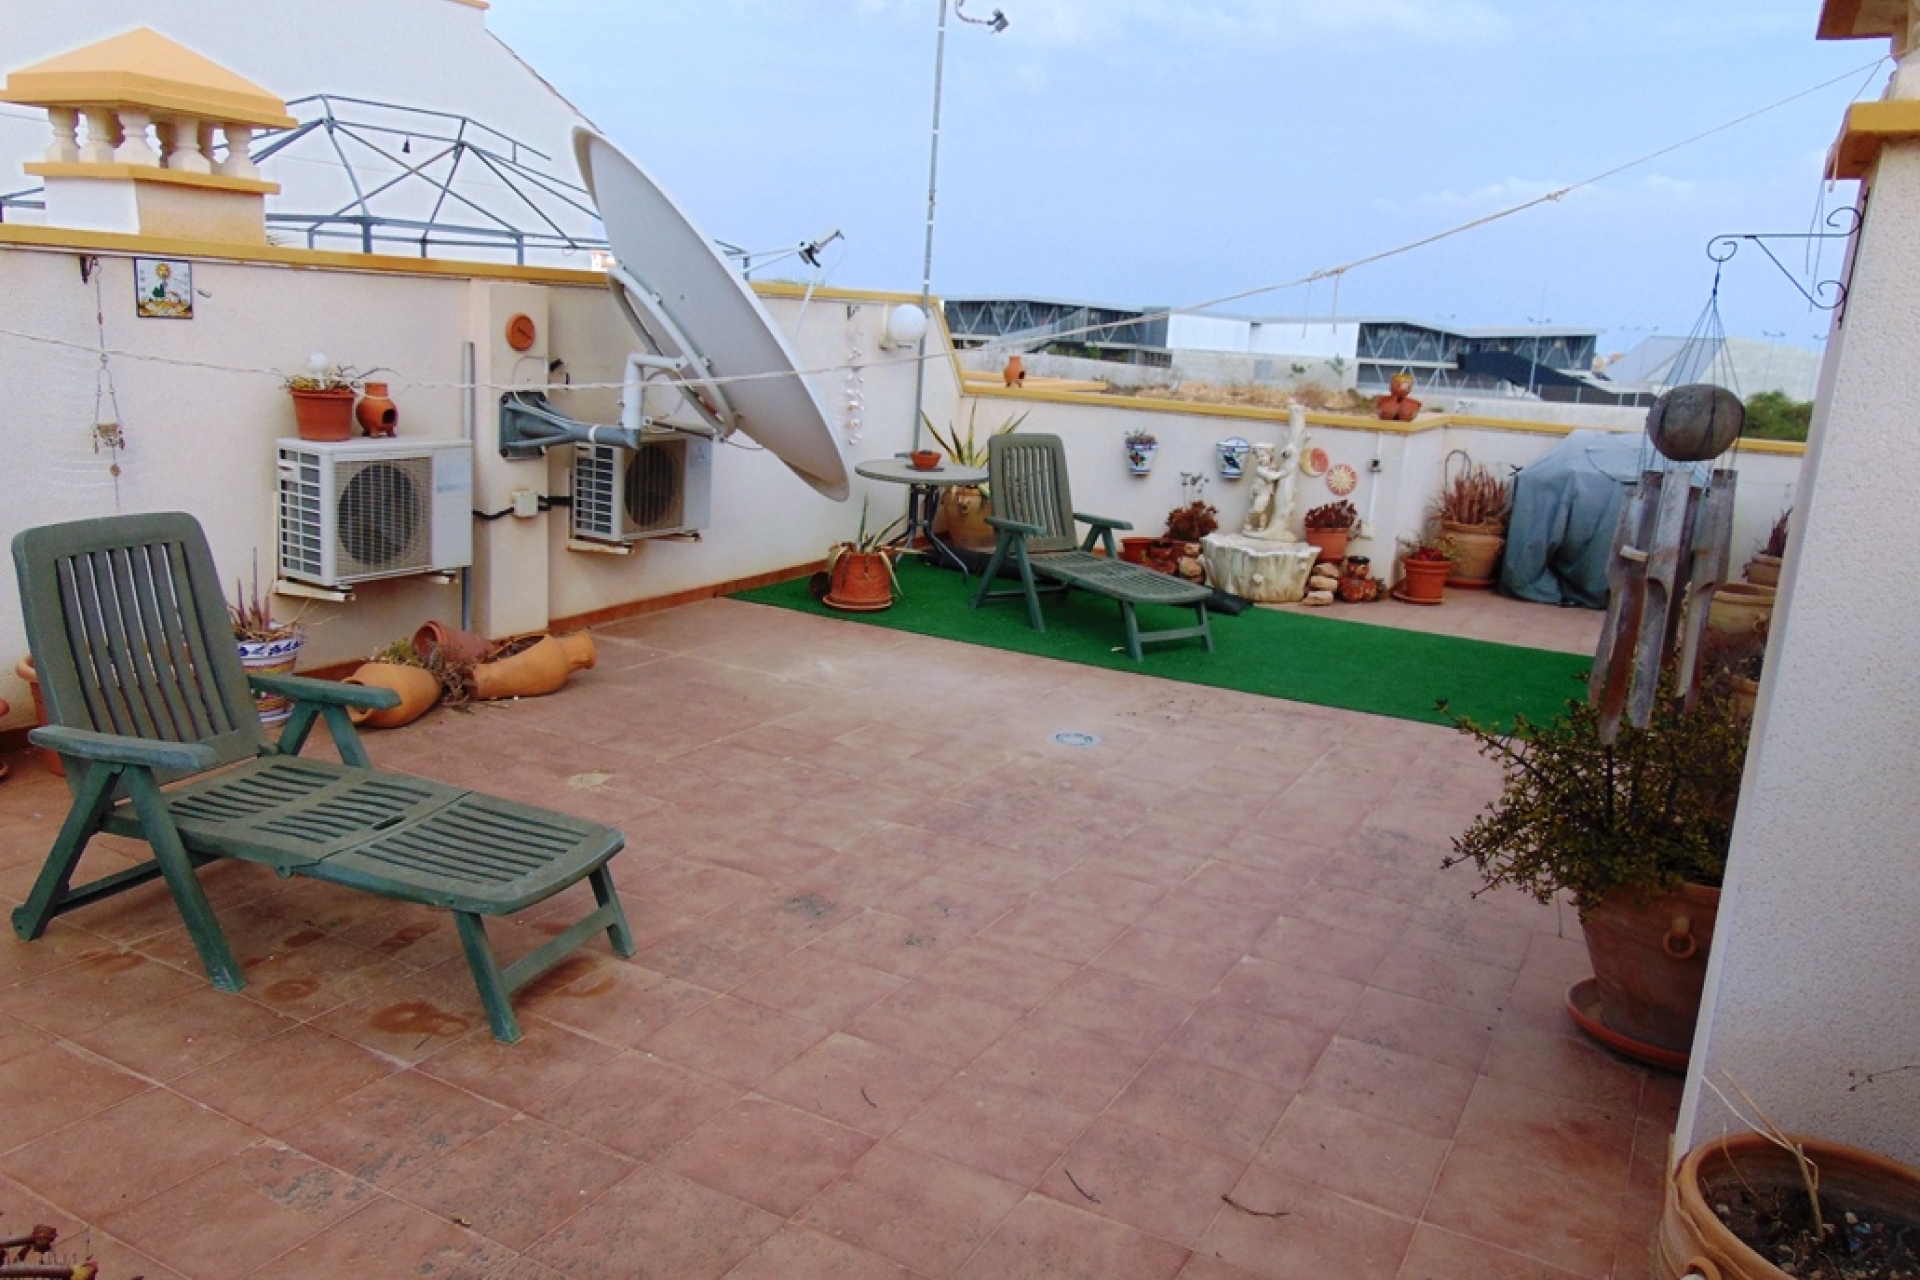 Archived - Bungalow for sale - Orihuela Costa - Los Dolses